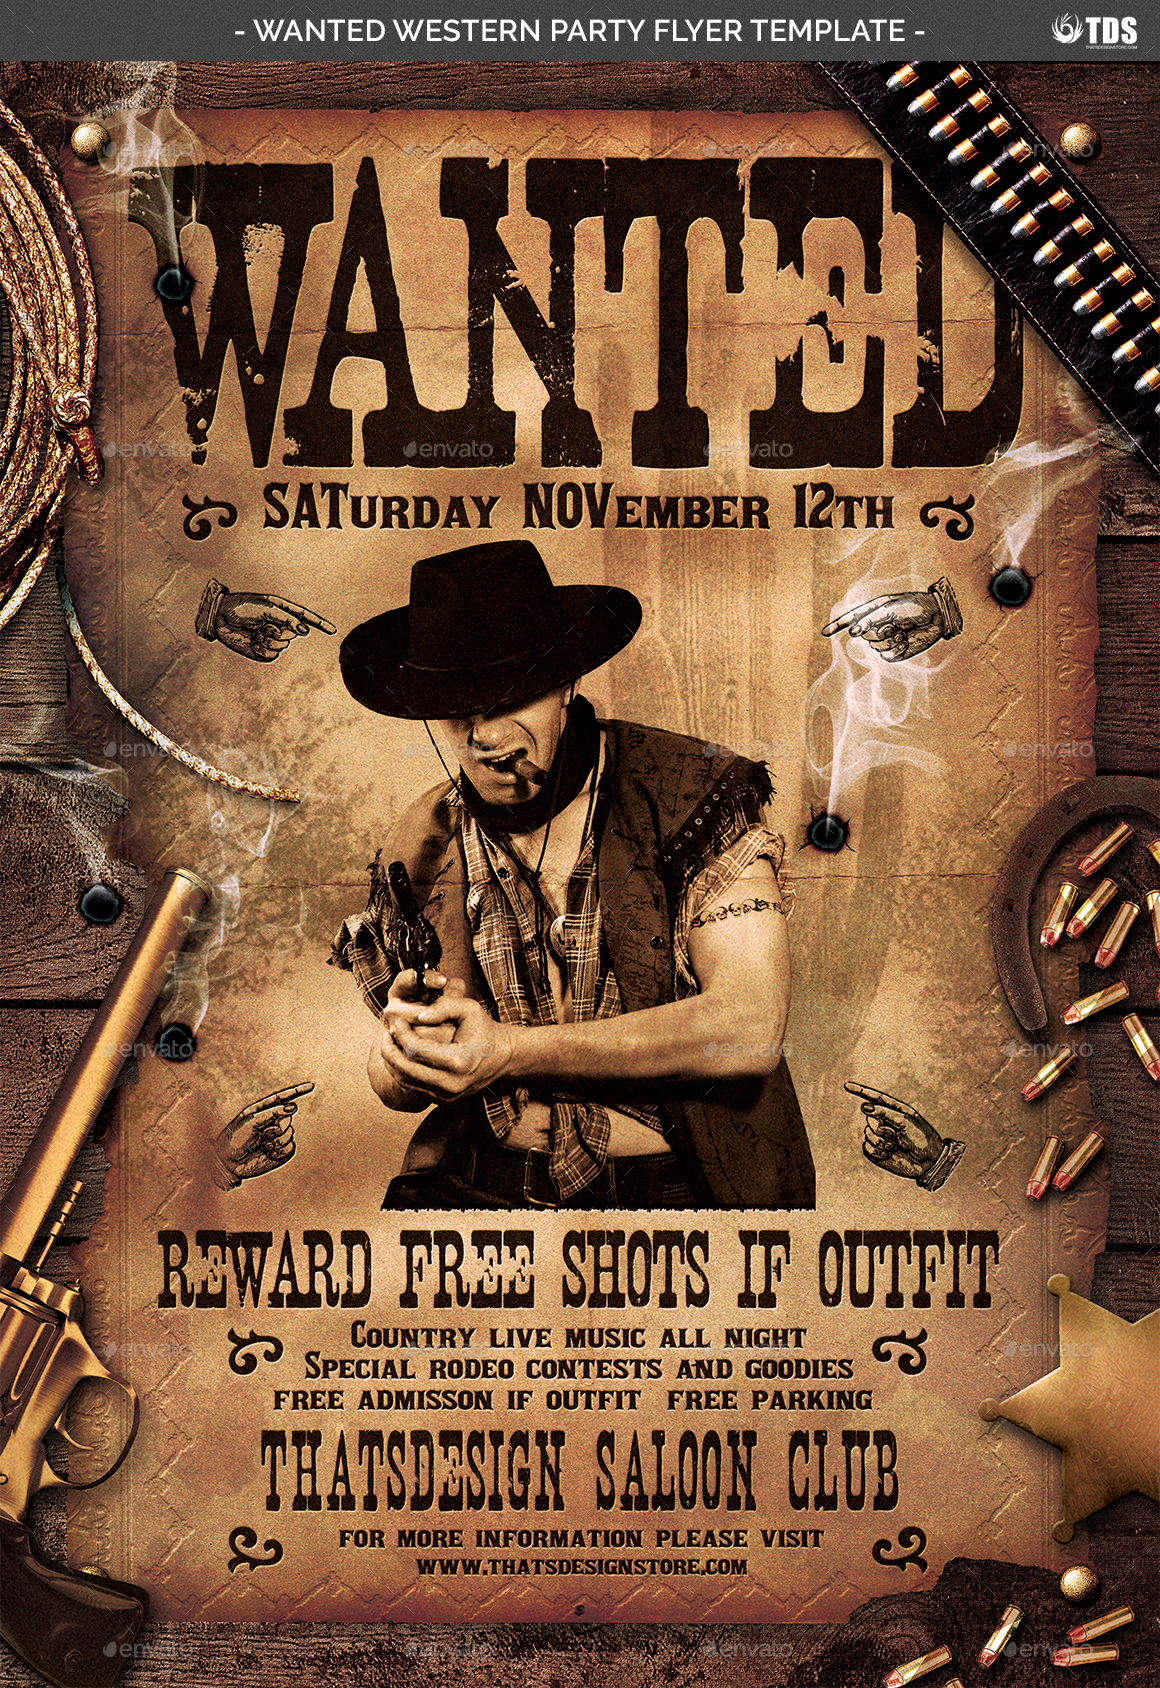 Wanted Flyer Template Free ] – Wanted Western Party Flyer Intended For Help Wanted Flyer Template Free